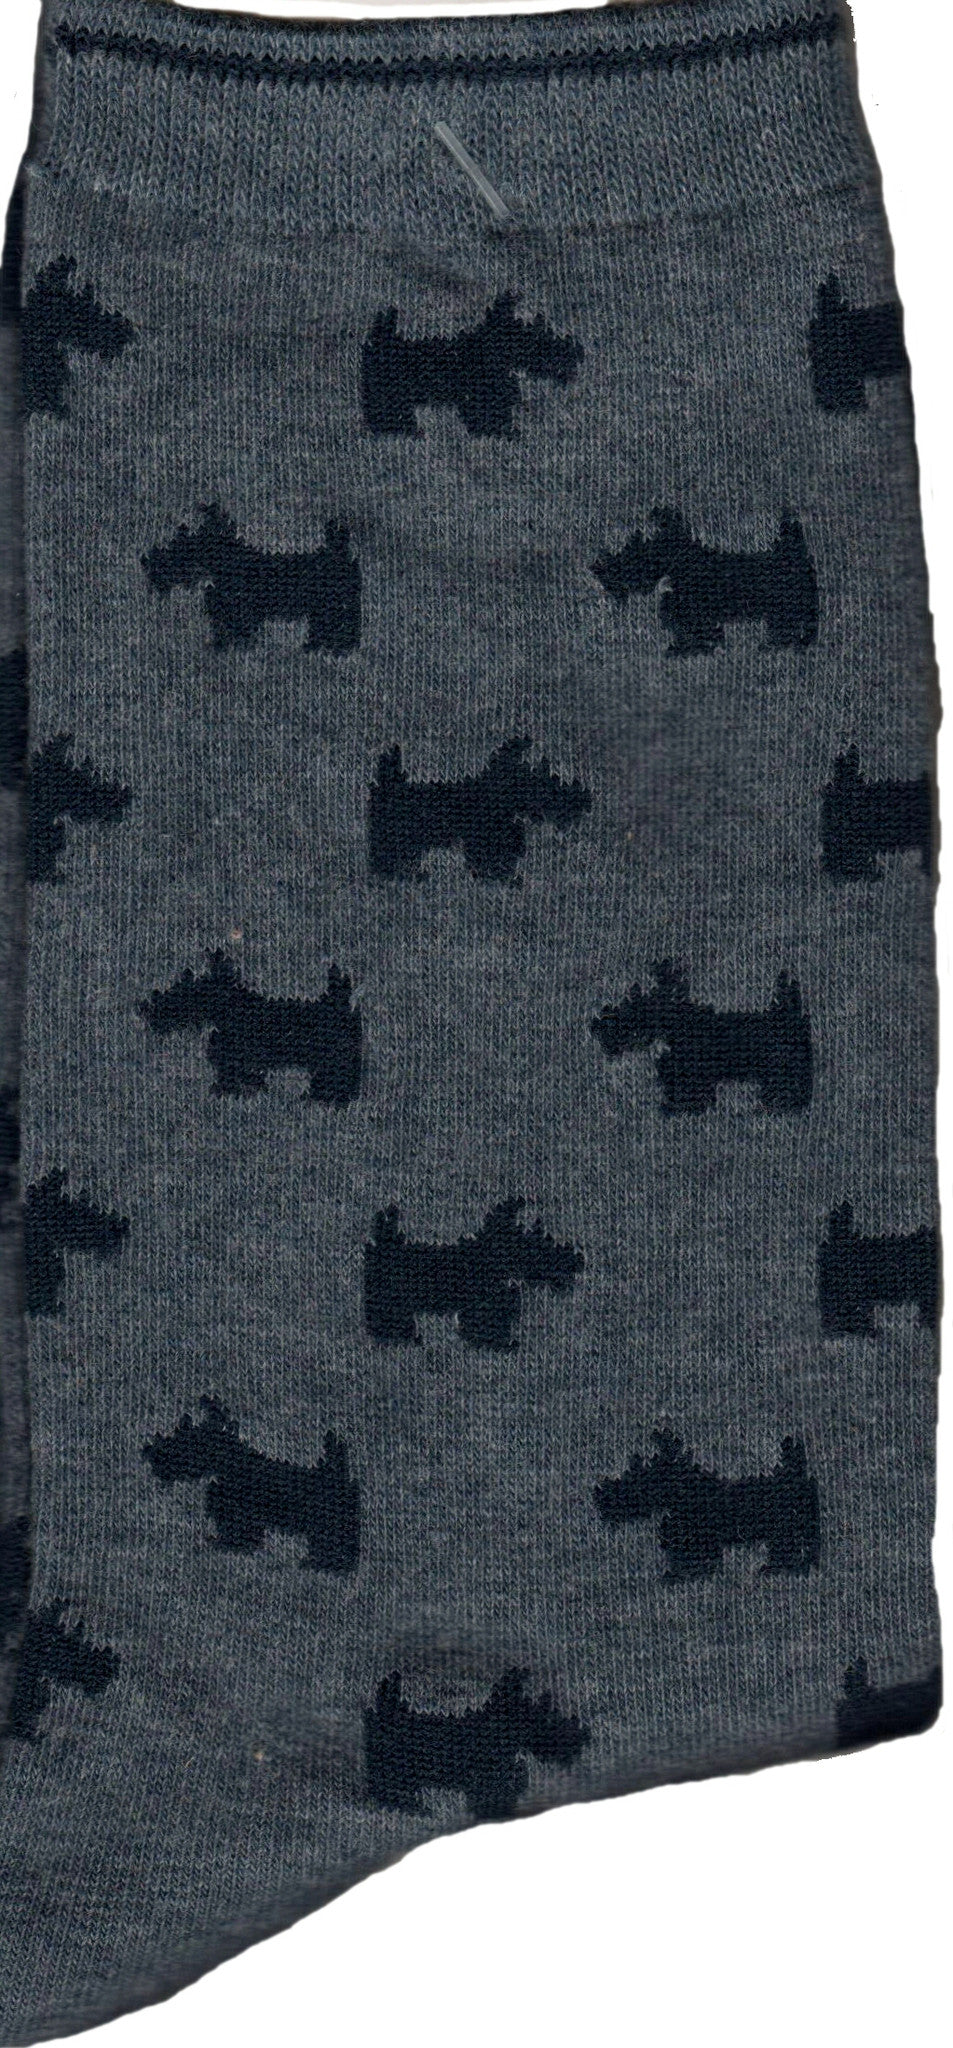 Slate Blue with Scottie Dog Silhouettes makes this sock cute and simple to  love.